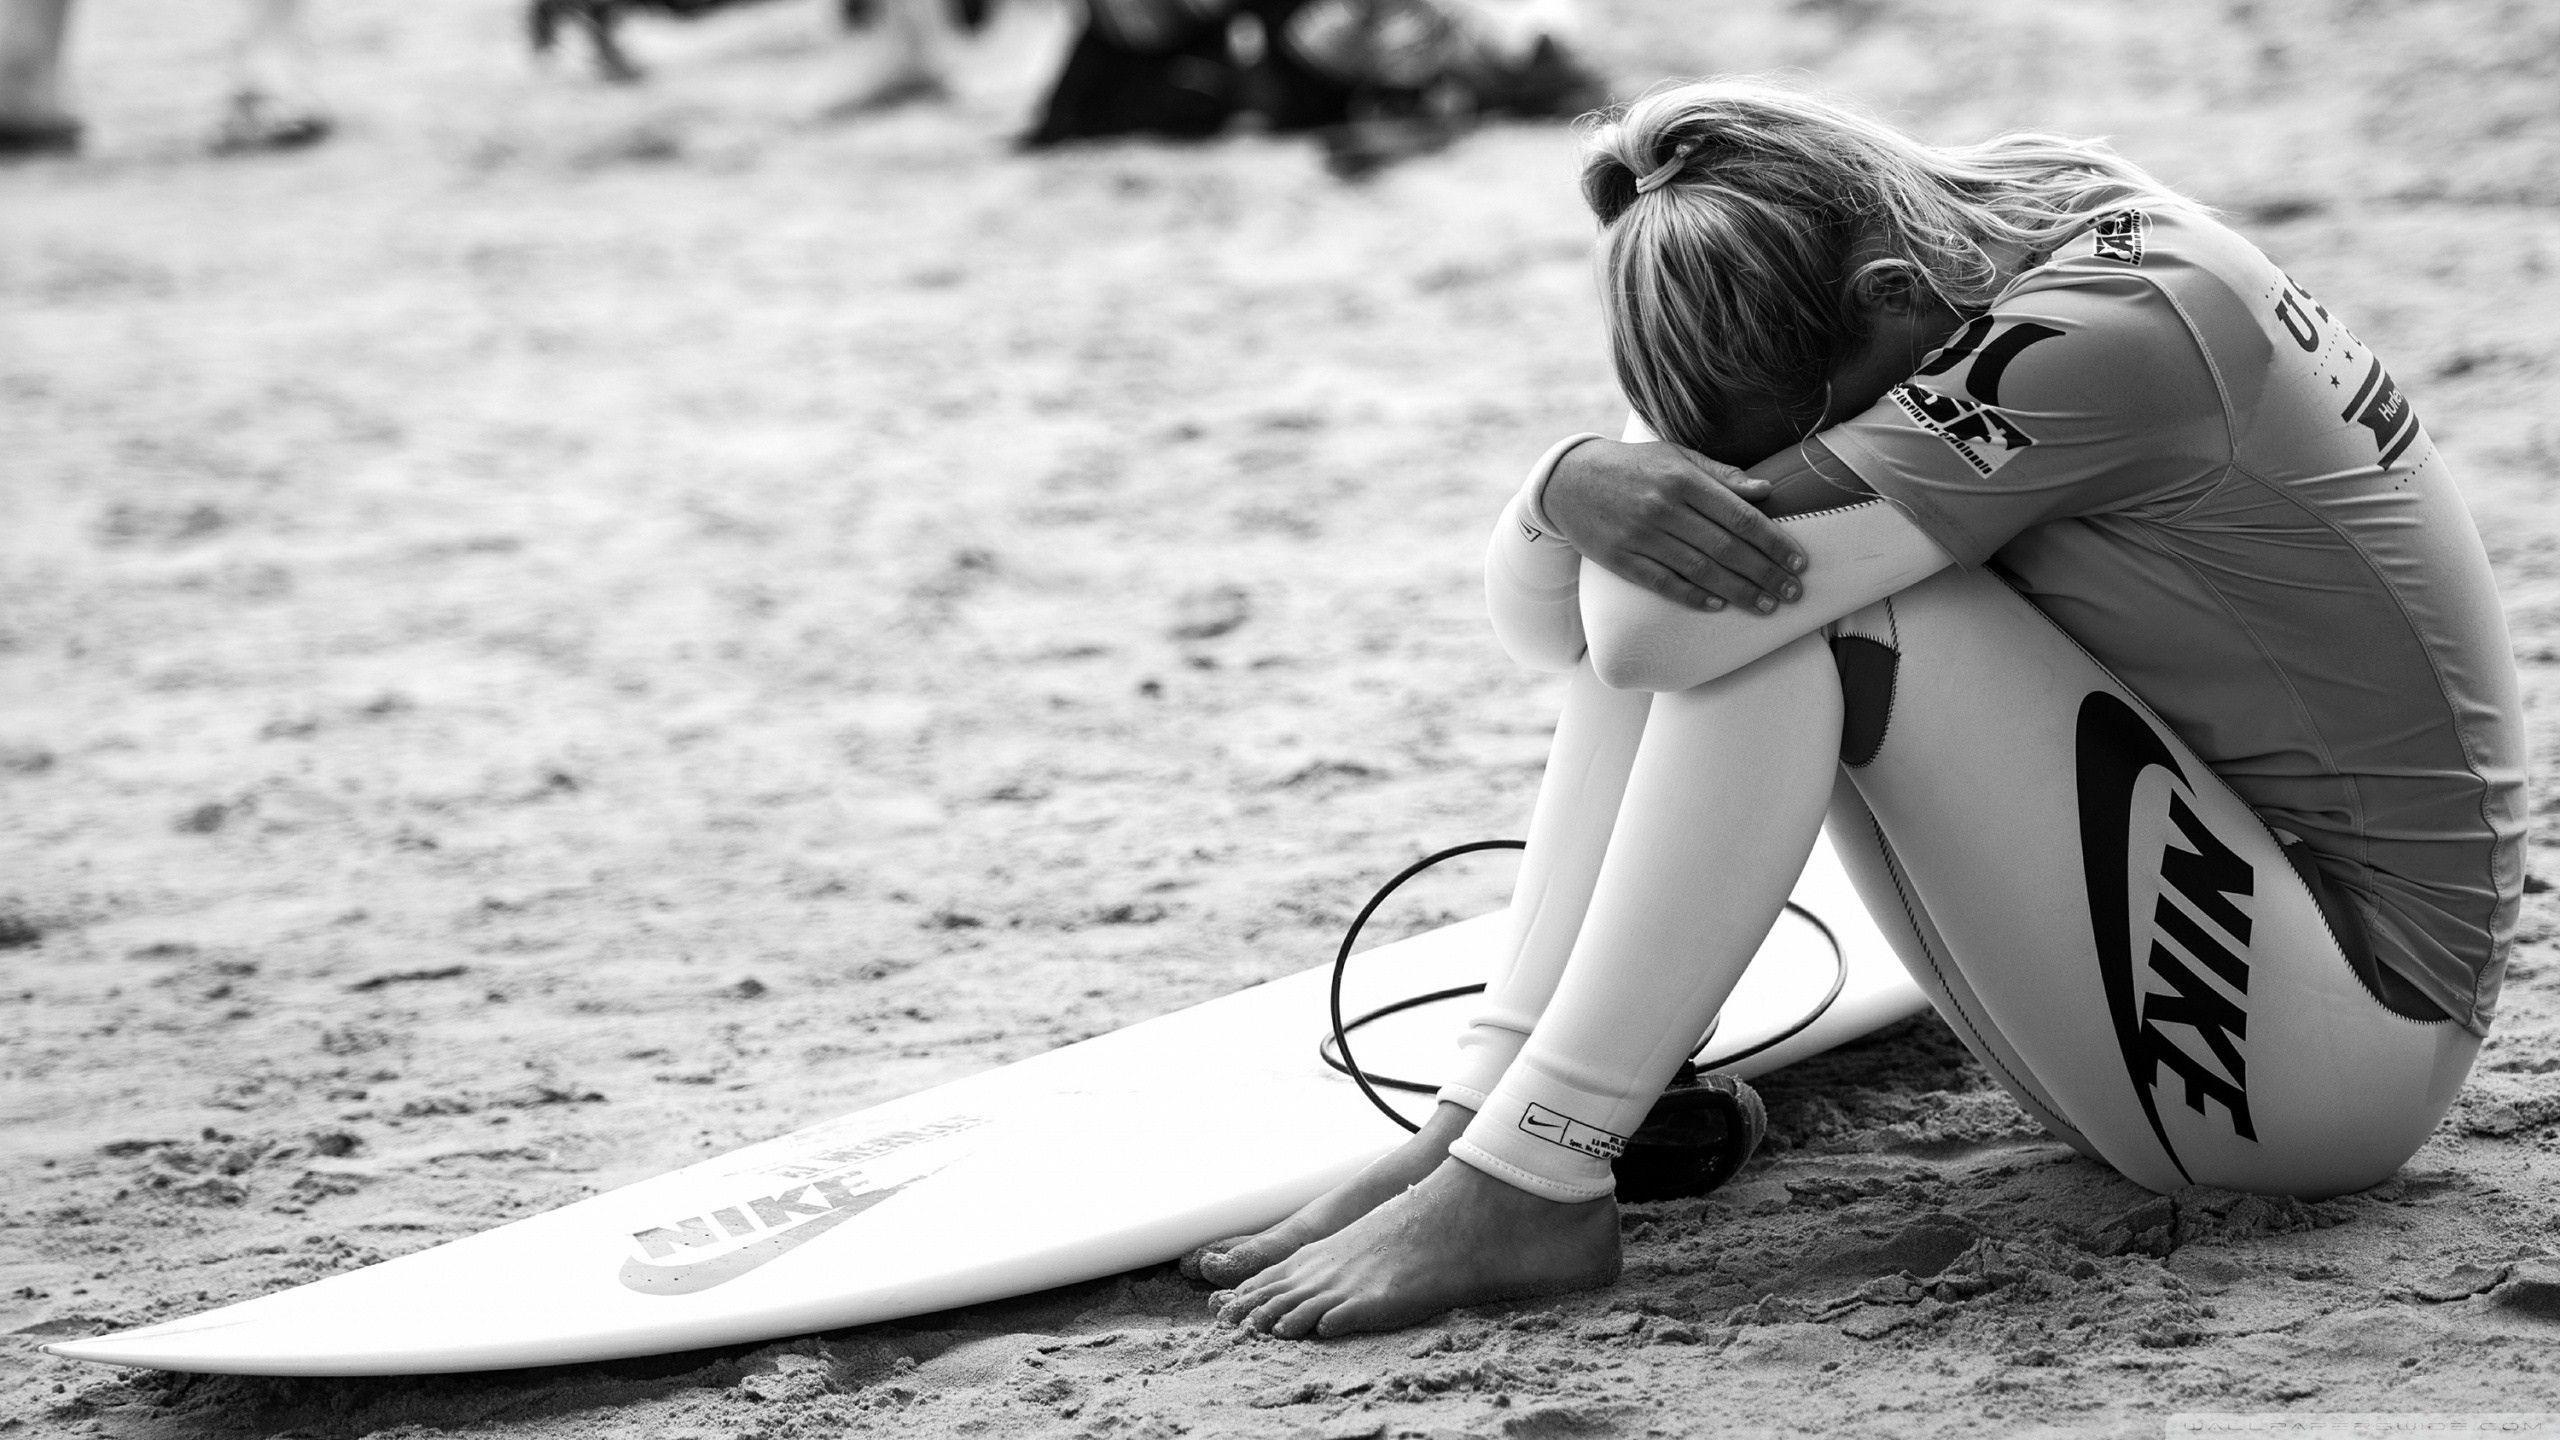 Wallpaper Surfing, Surfer, Girl, Sport, Nike, Bw HD, Picture, Image